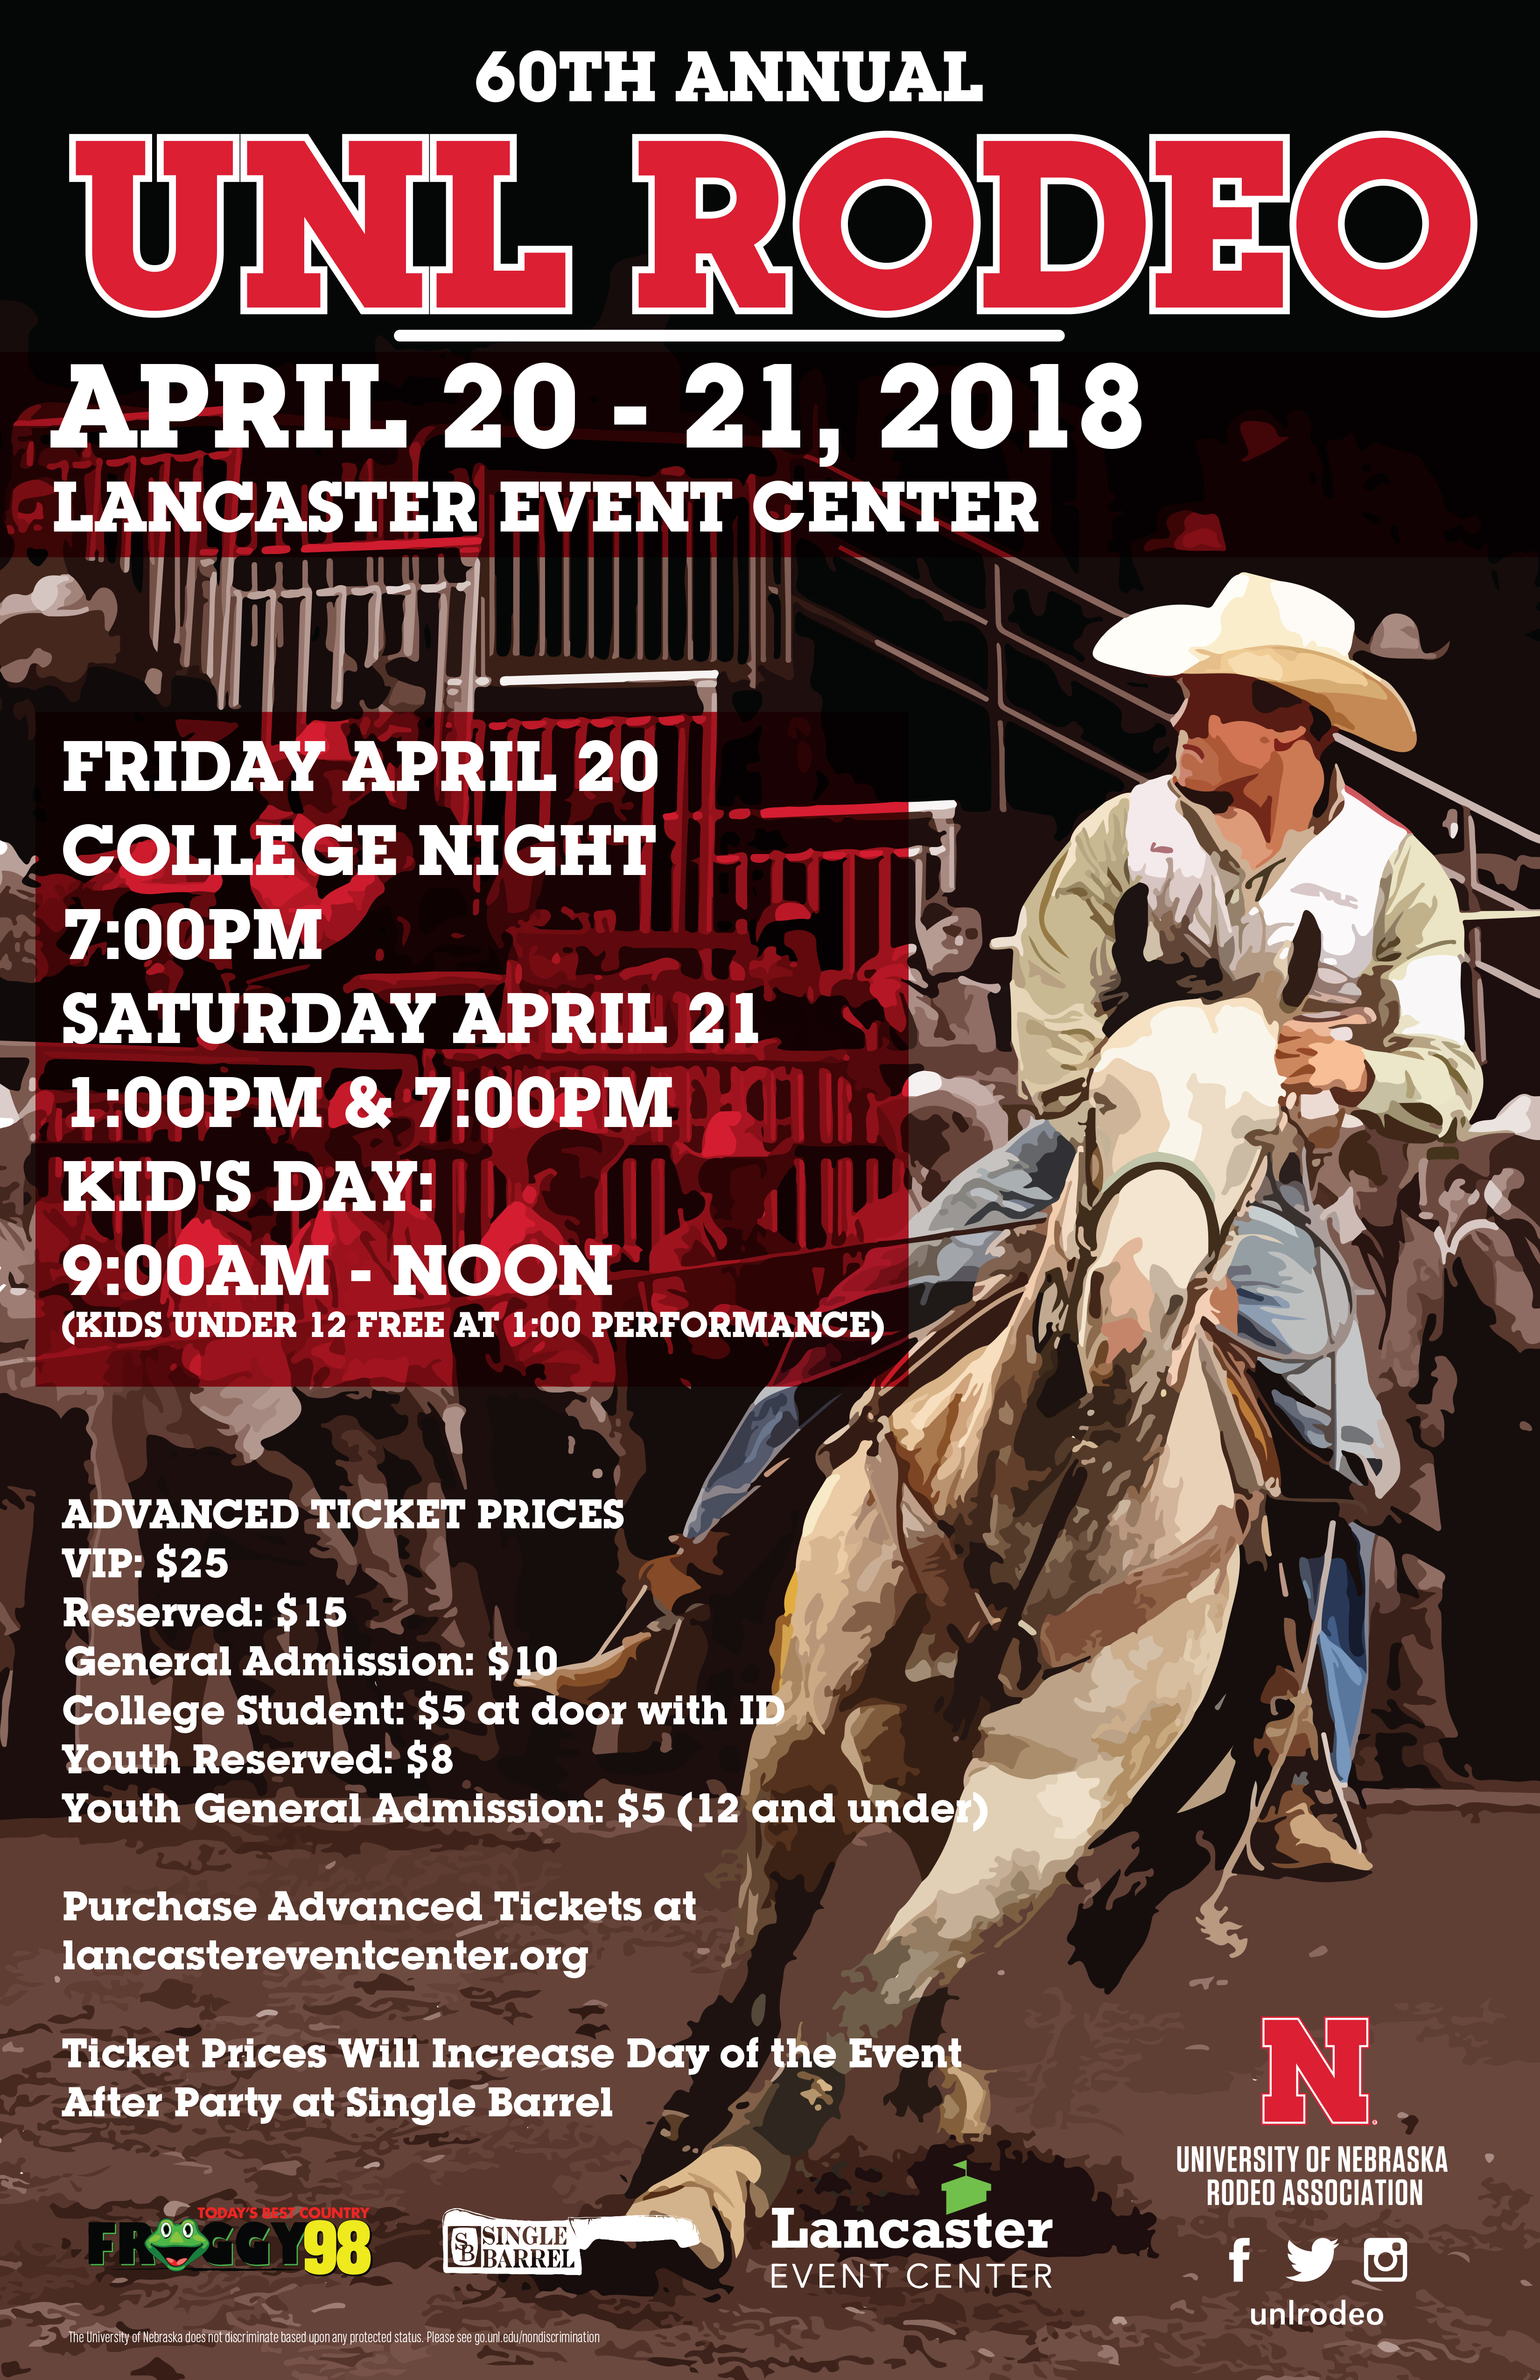 Join us for the UNL Rodeo on April 20-21